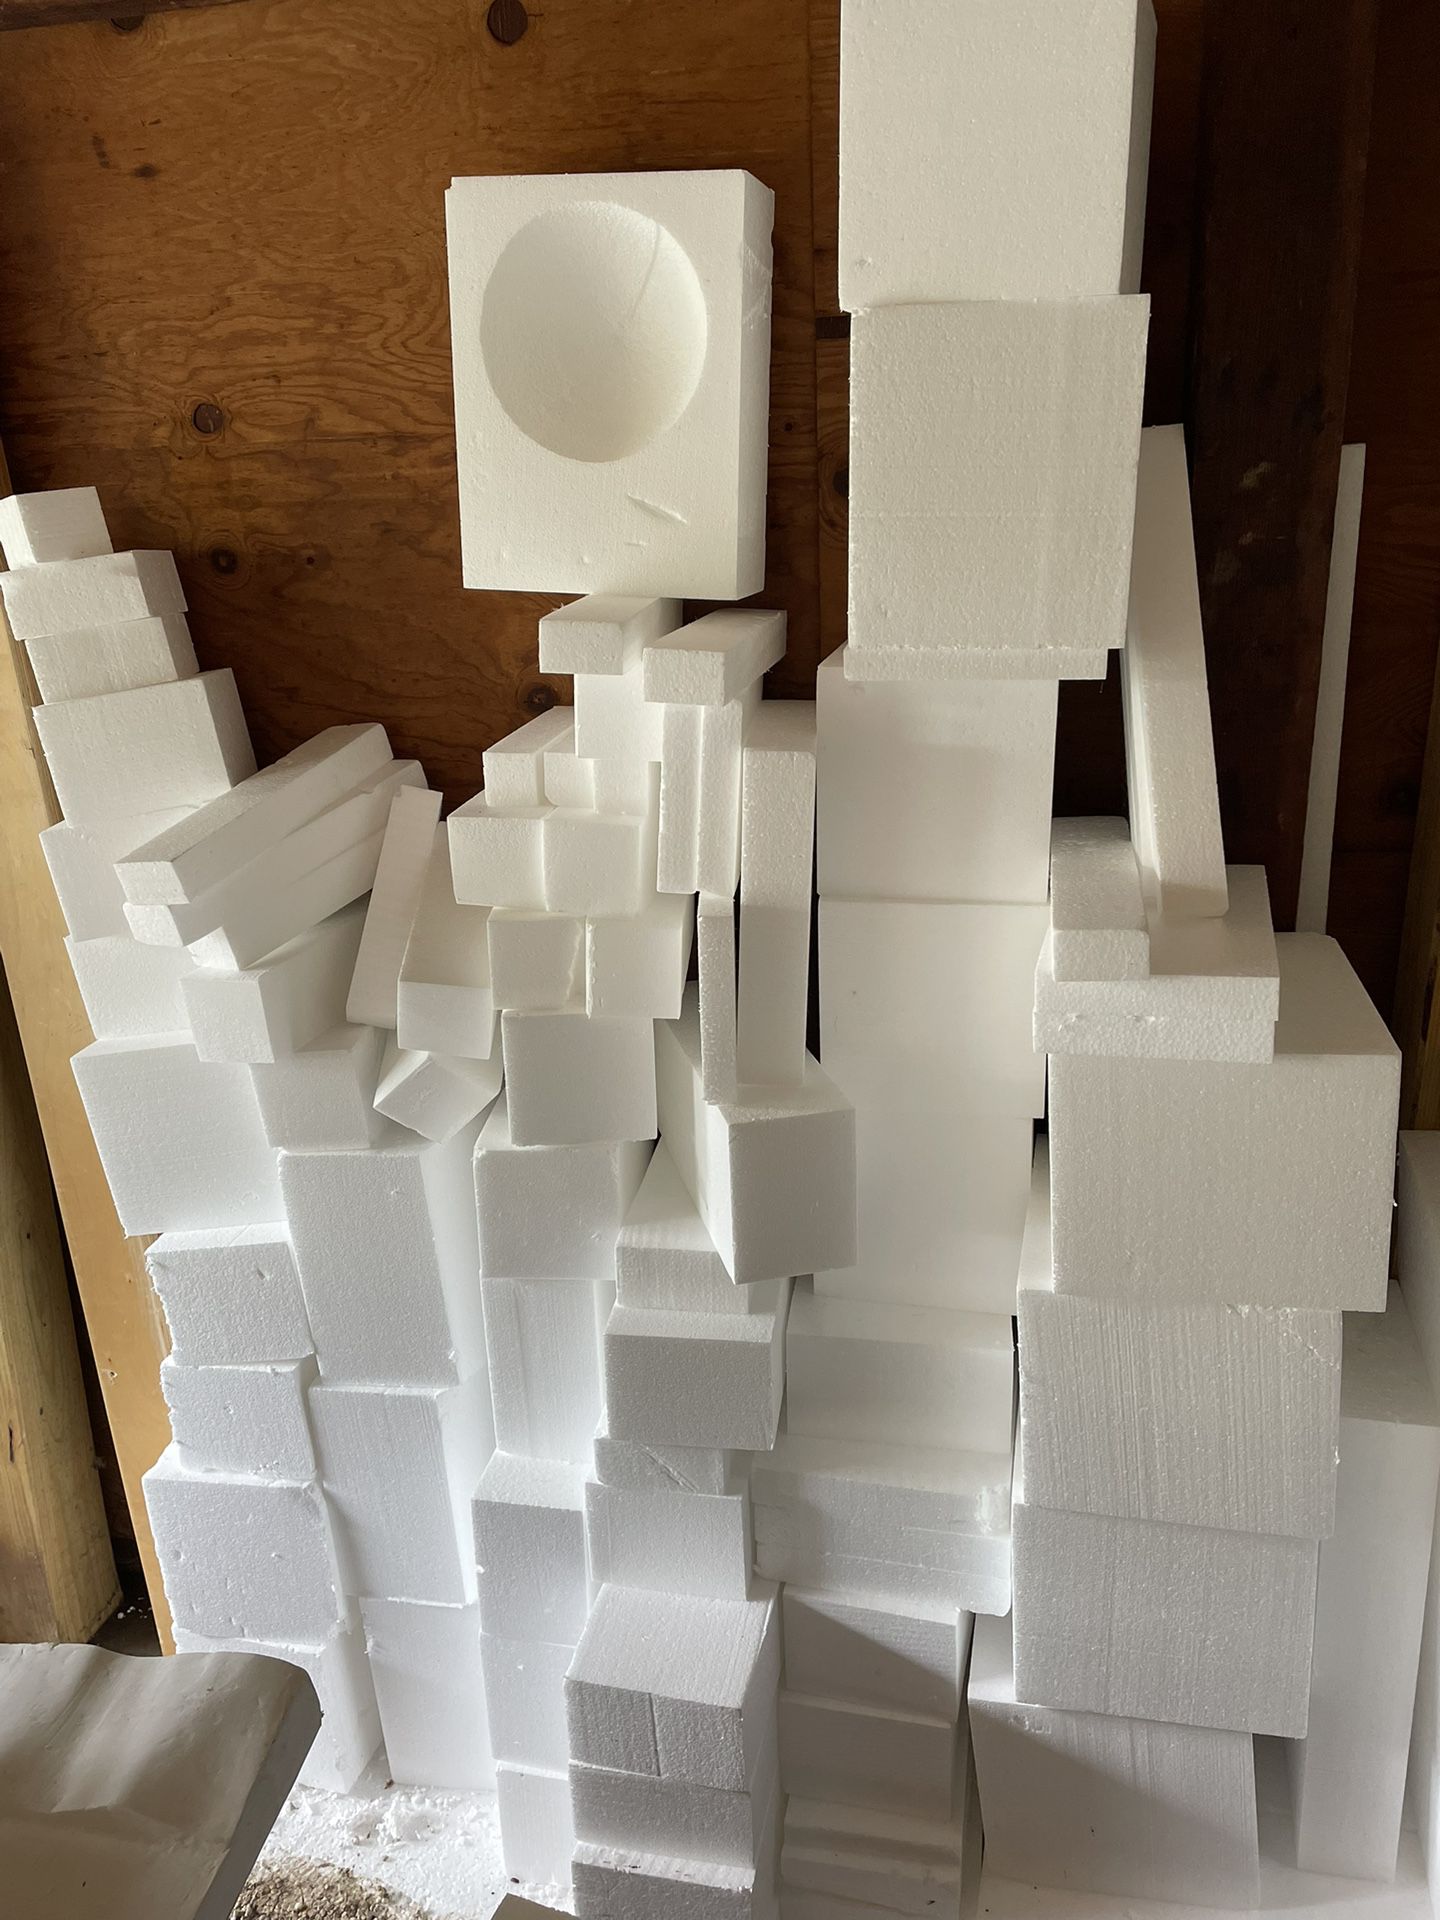 Styrofoam for packing or art projects/set builds